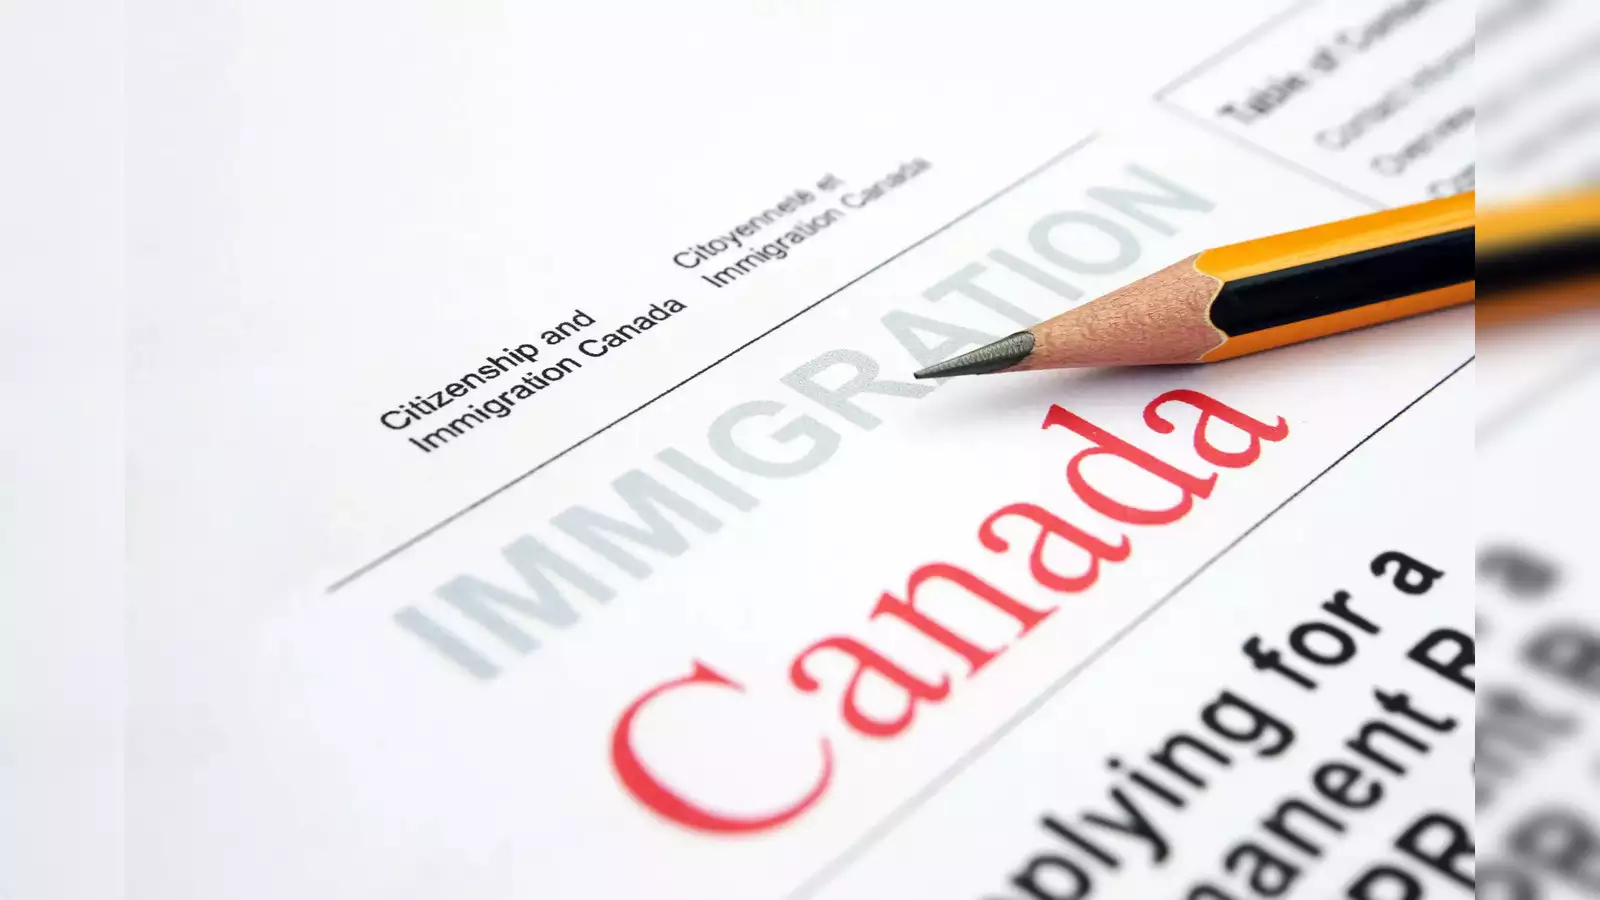 Immigration to Canada from UAE